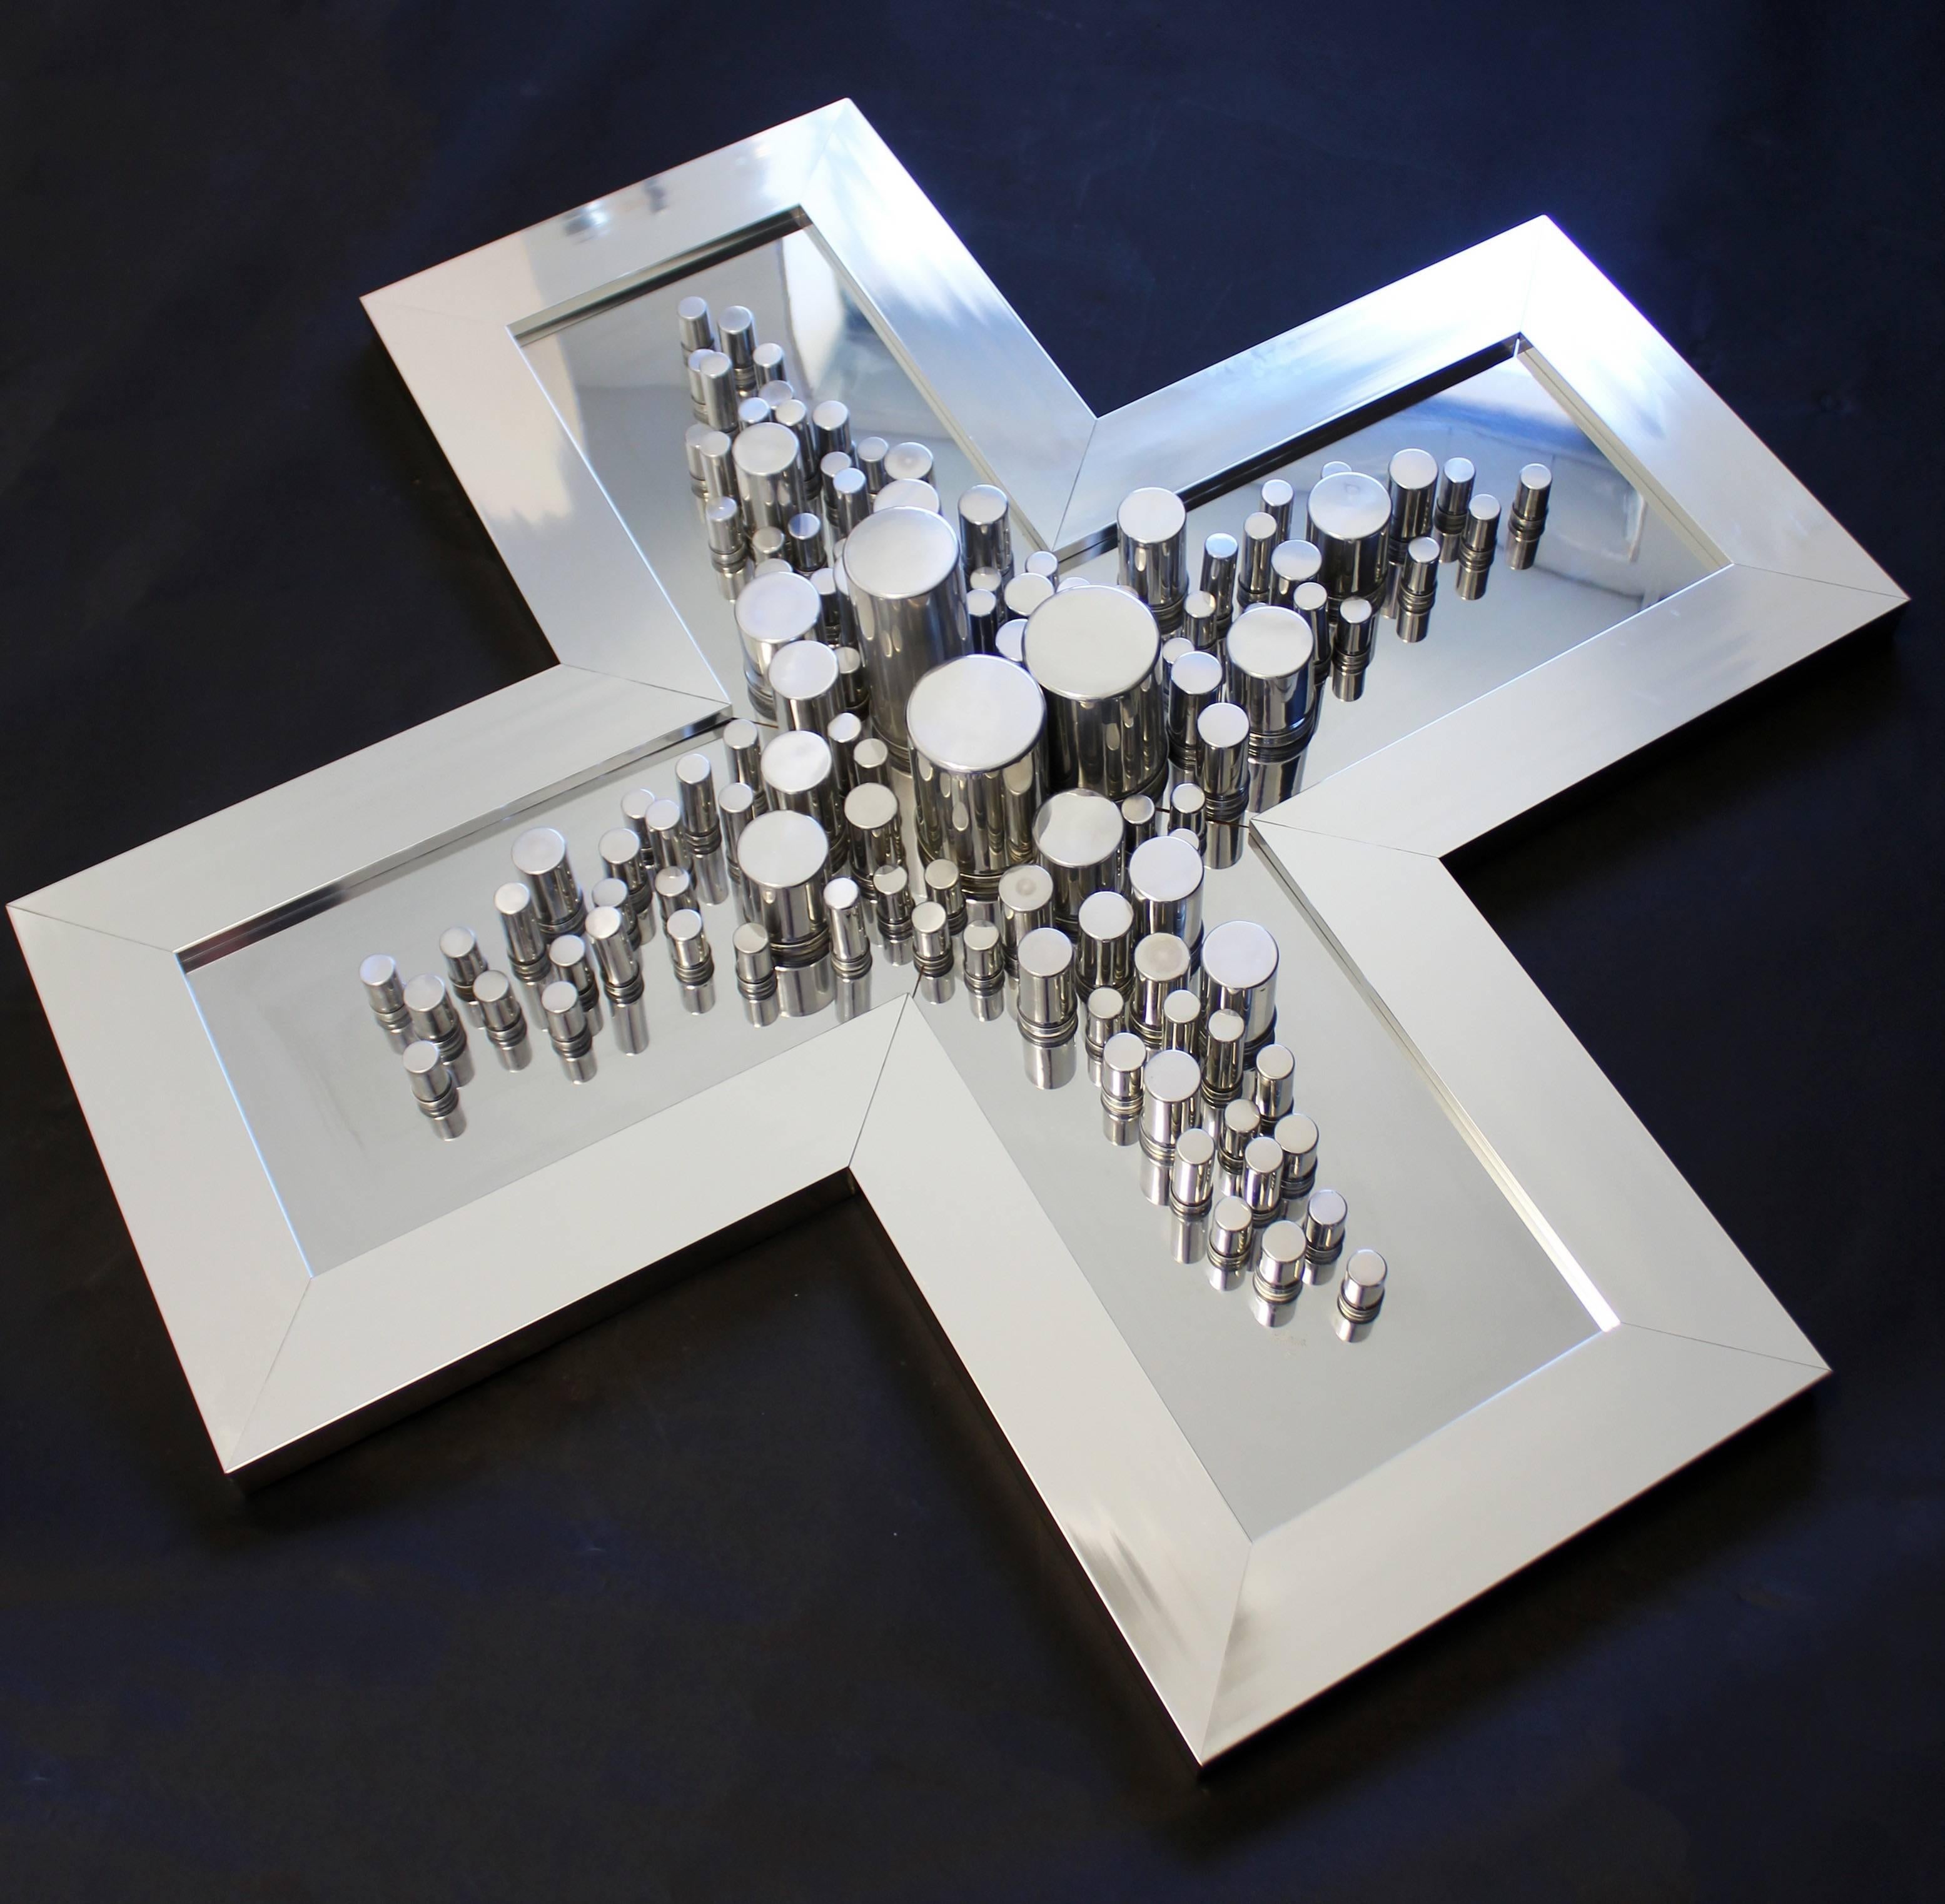 Offered here is an artistic large chrome X-shaped mirror wall art sculpture signed by Greg Copeland, dated 1977. In excellent condition. The dimensions are 40